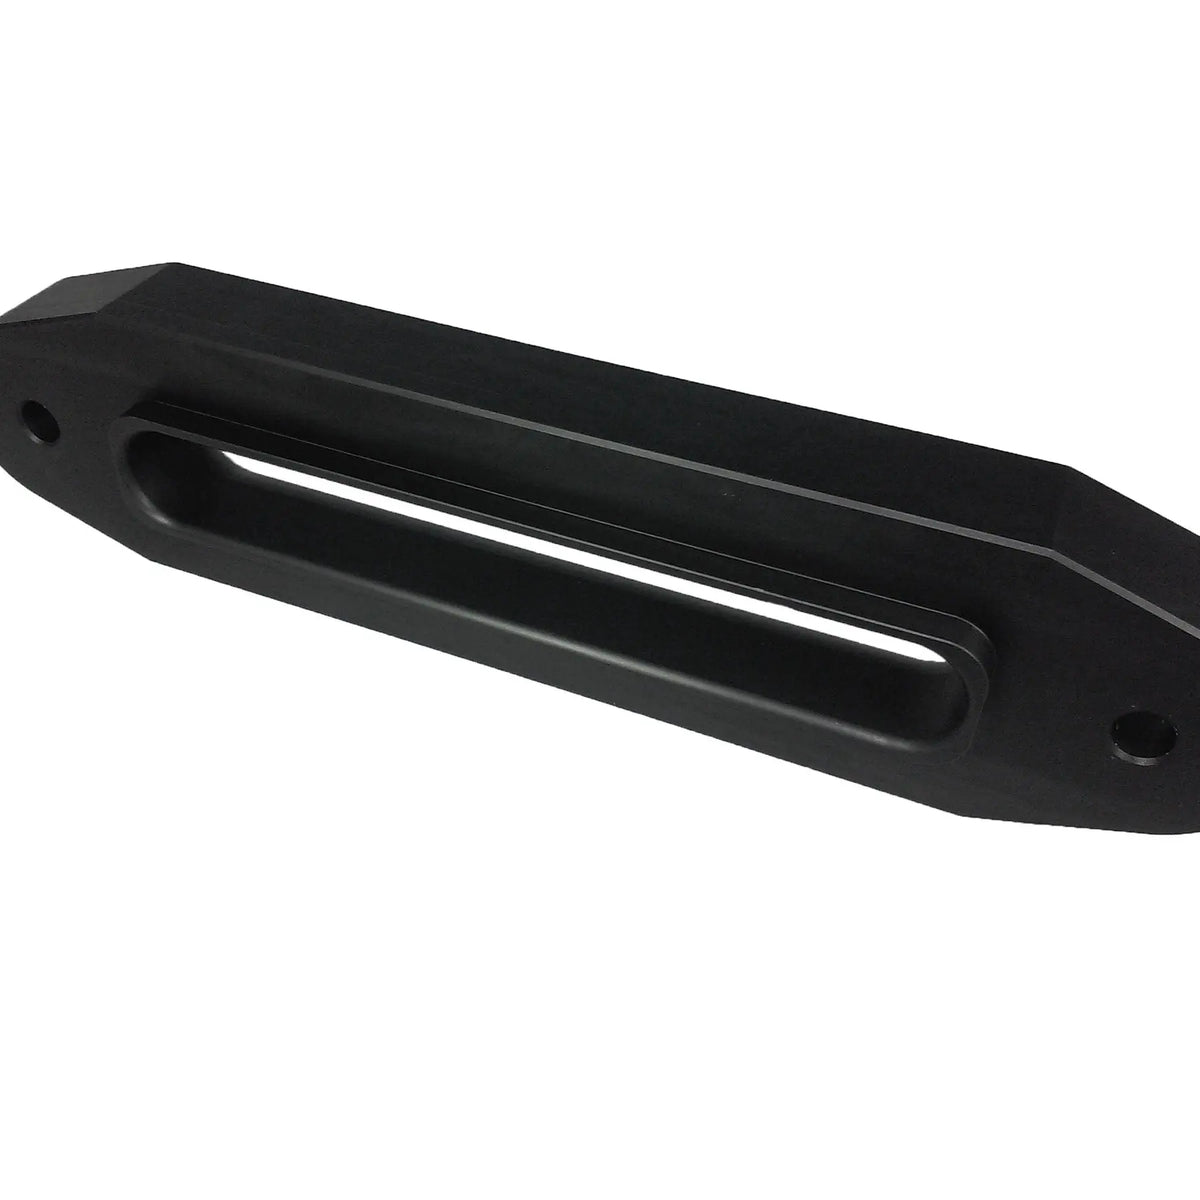 Black 10" Double Thick Fairlead with Large Radii and Liner, for Synthetic Winch Rope.